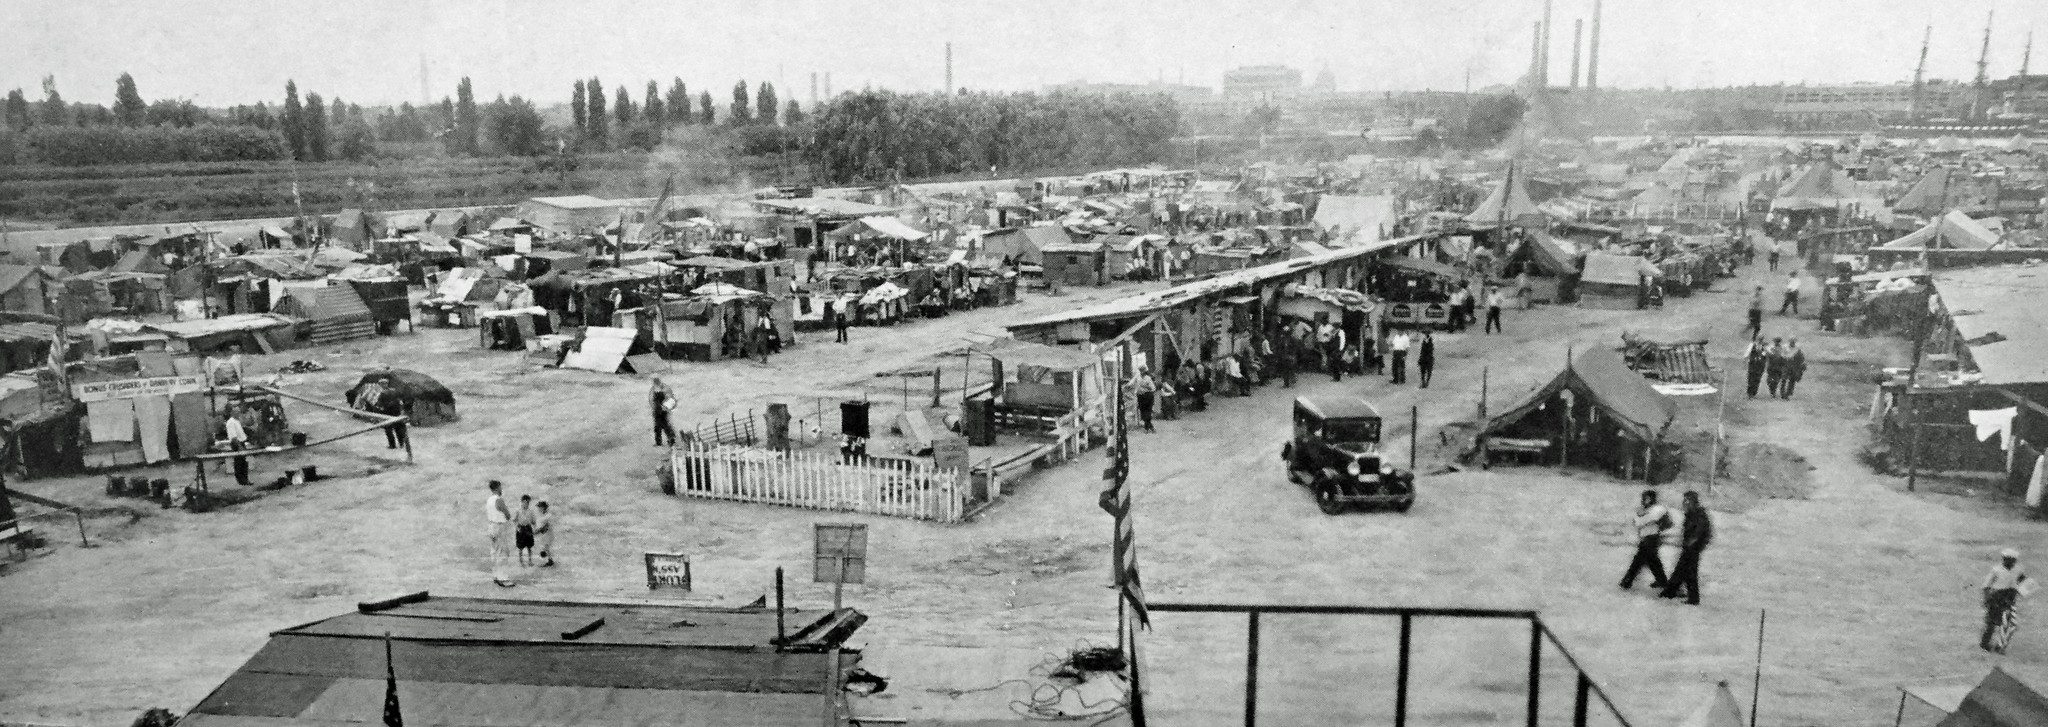 Overview of the Anacostia Bonus Army camp; the Capitol building can be seen in the background.